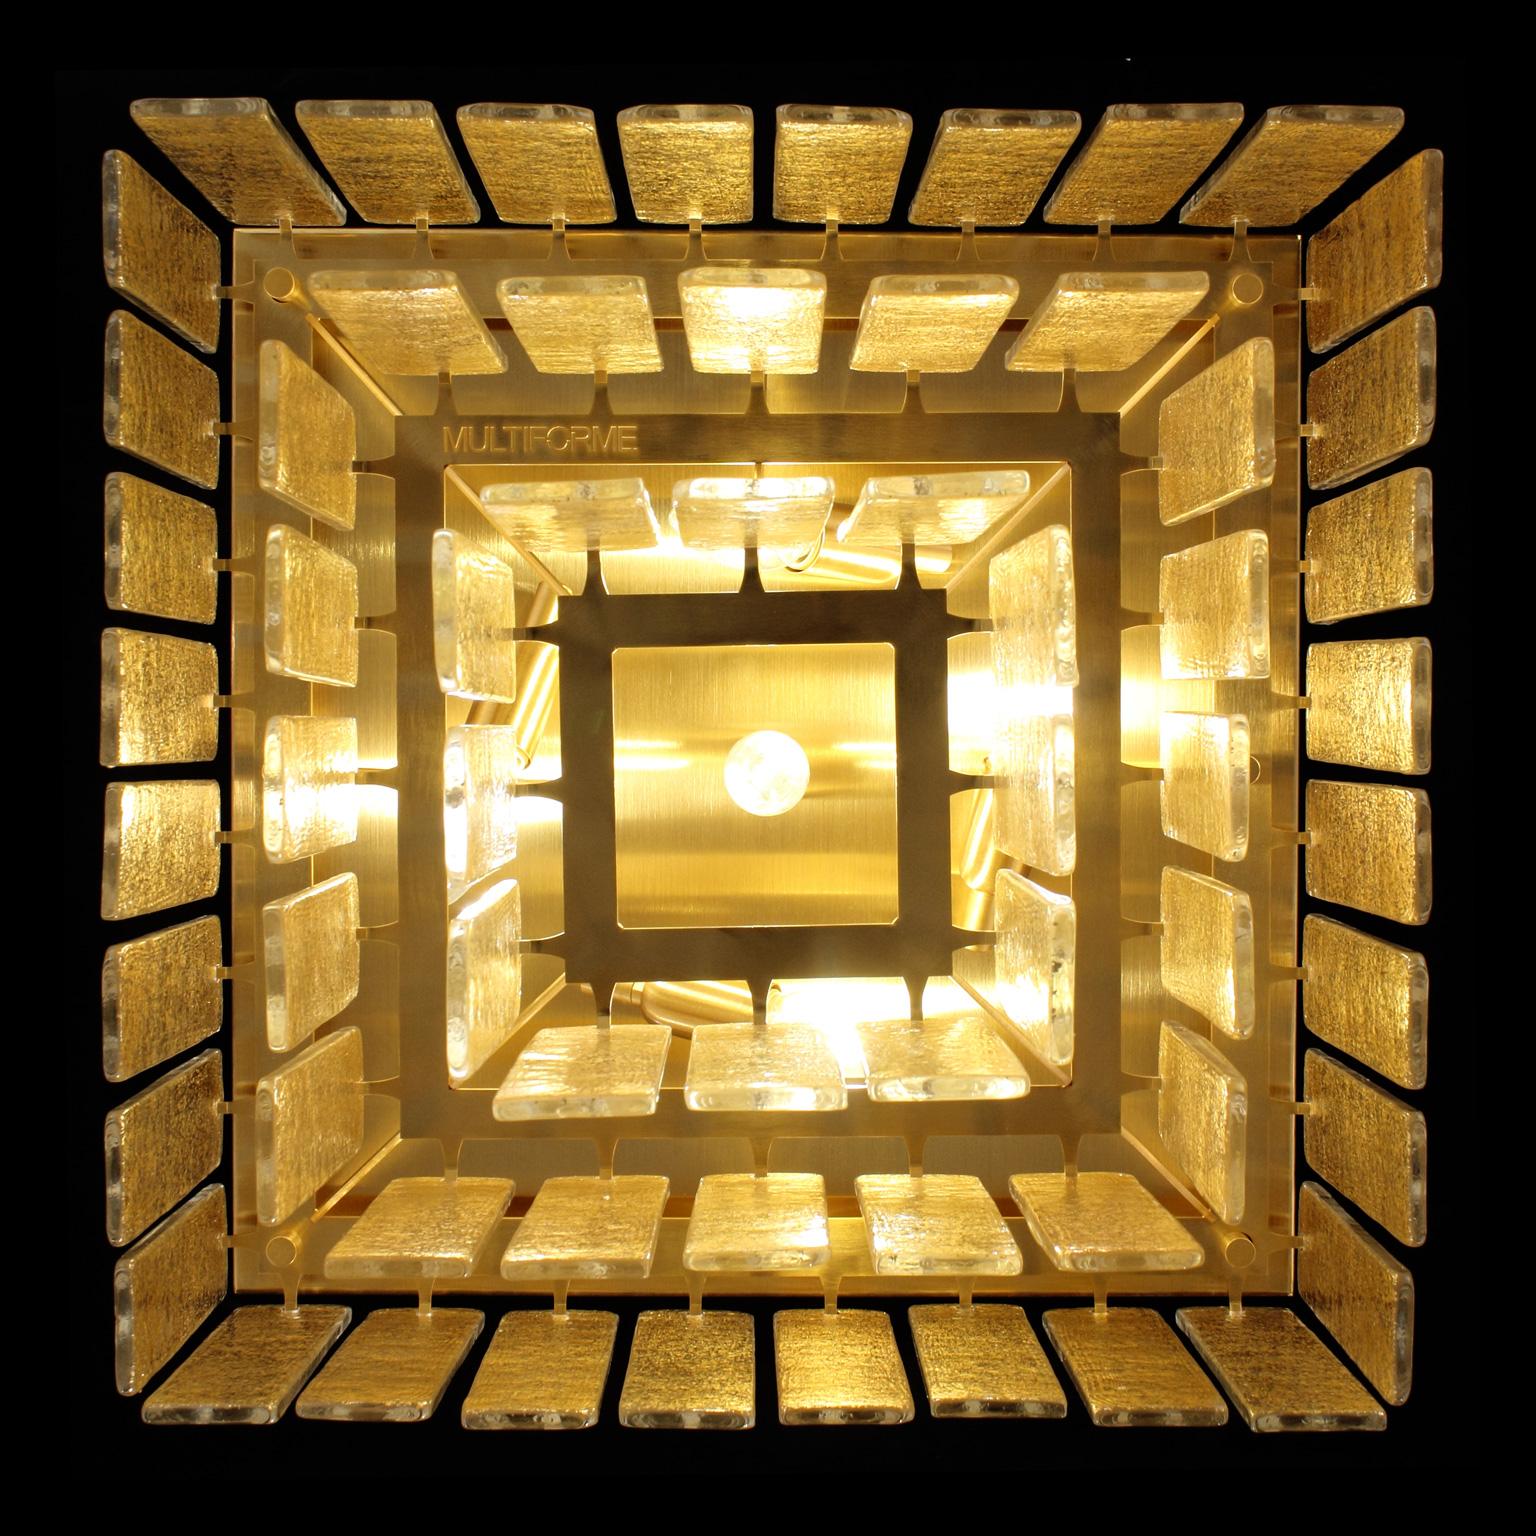 Charleston ceiling light 50 x 40 H, gold glass listels, brushed gold squared fixture by Multiforme
The modern style ceiling light Charleston, from our Progressive collection, is an extremely versatile lighting work that can be customized in many